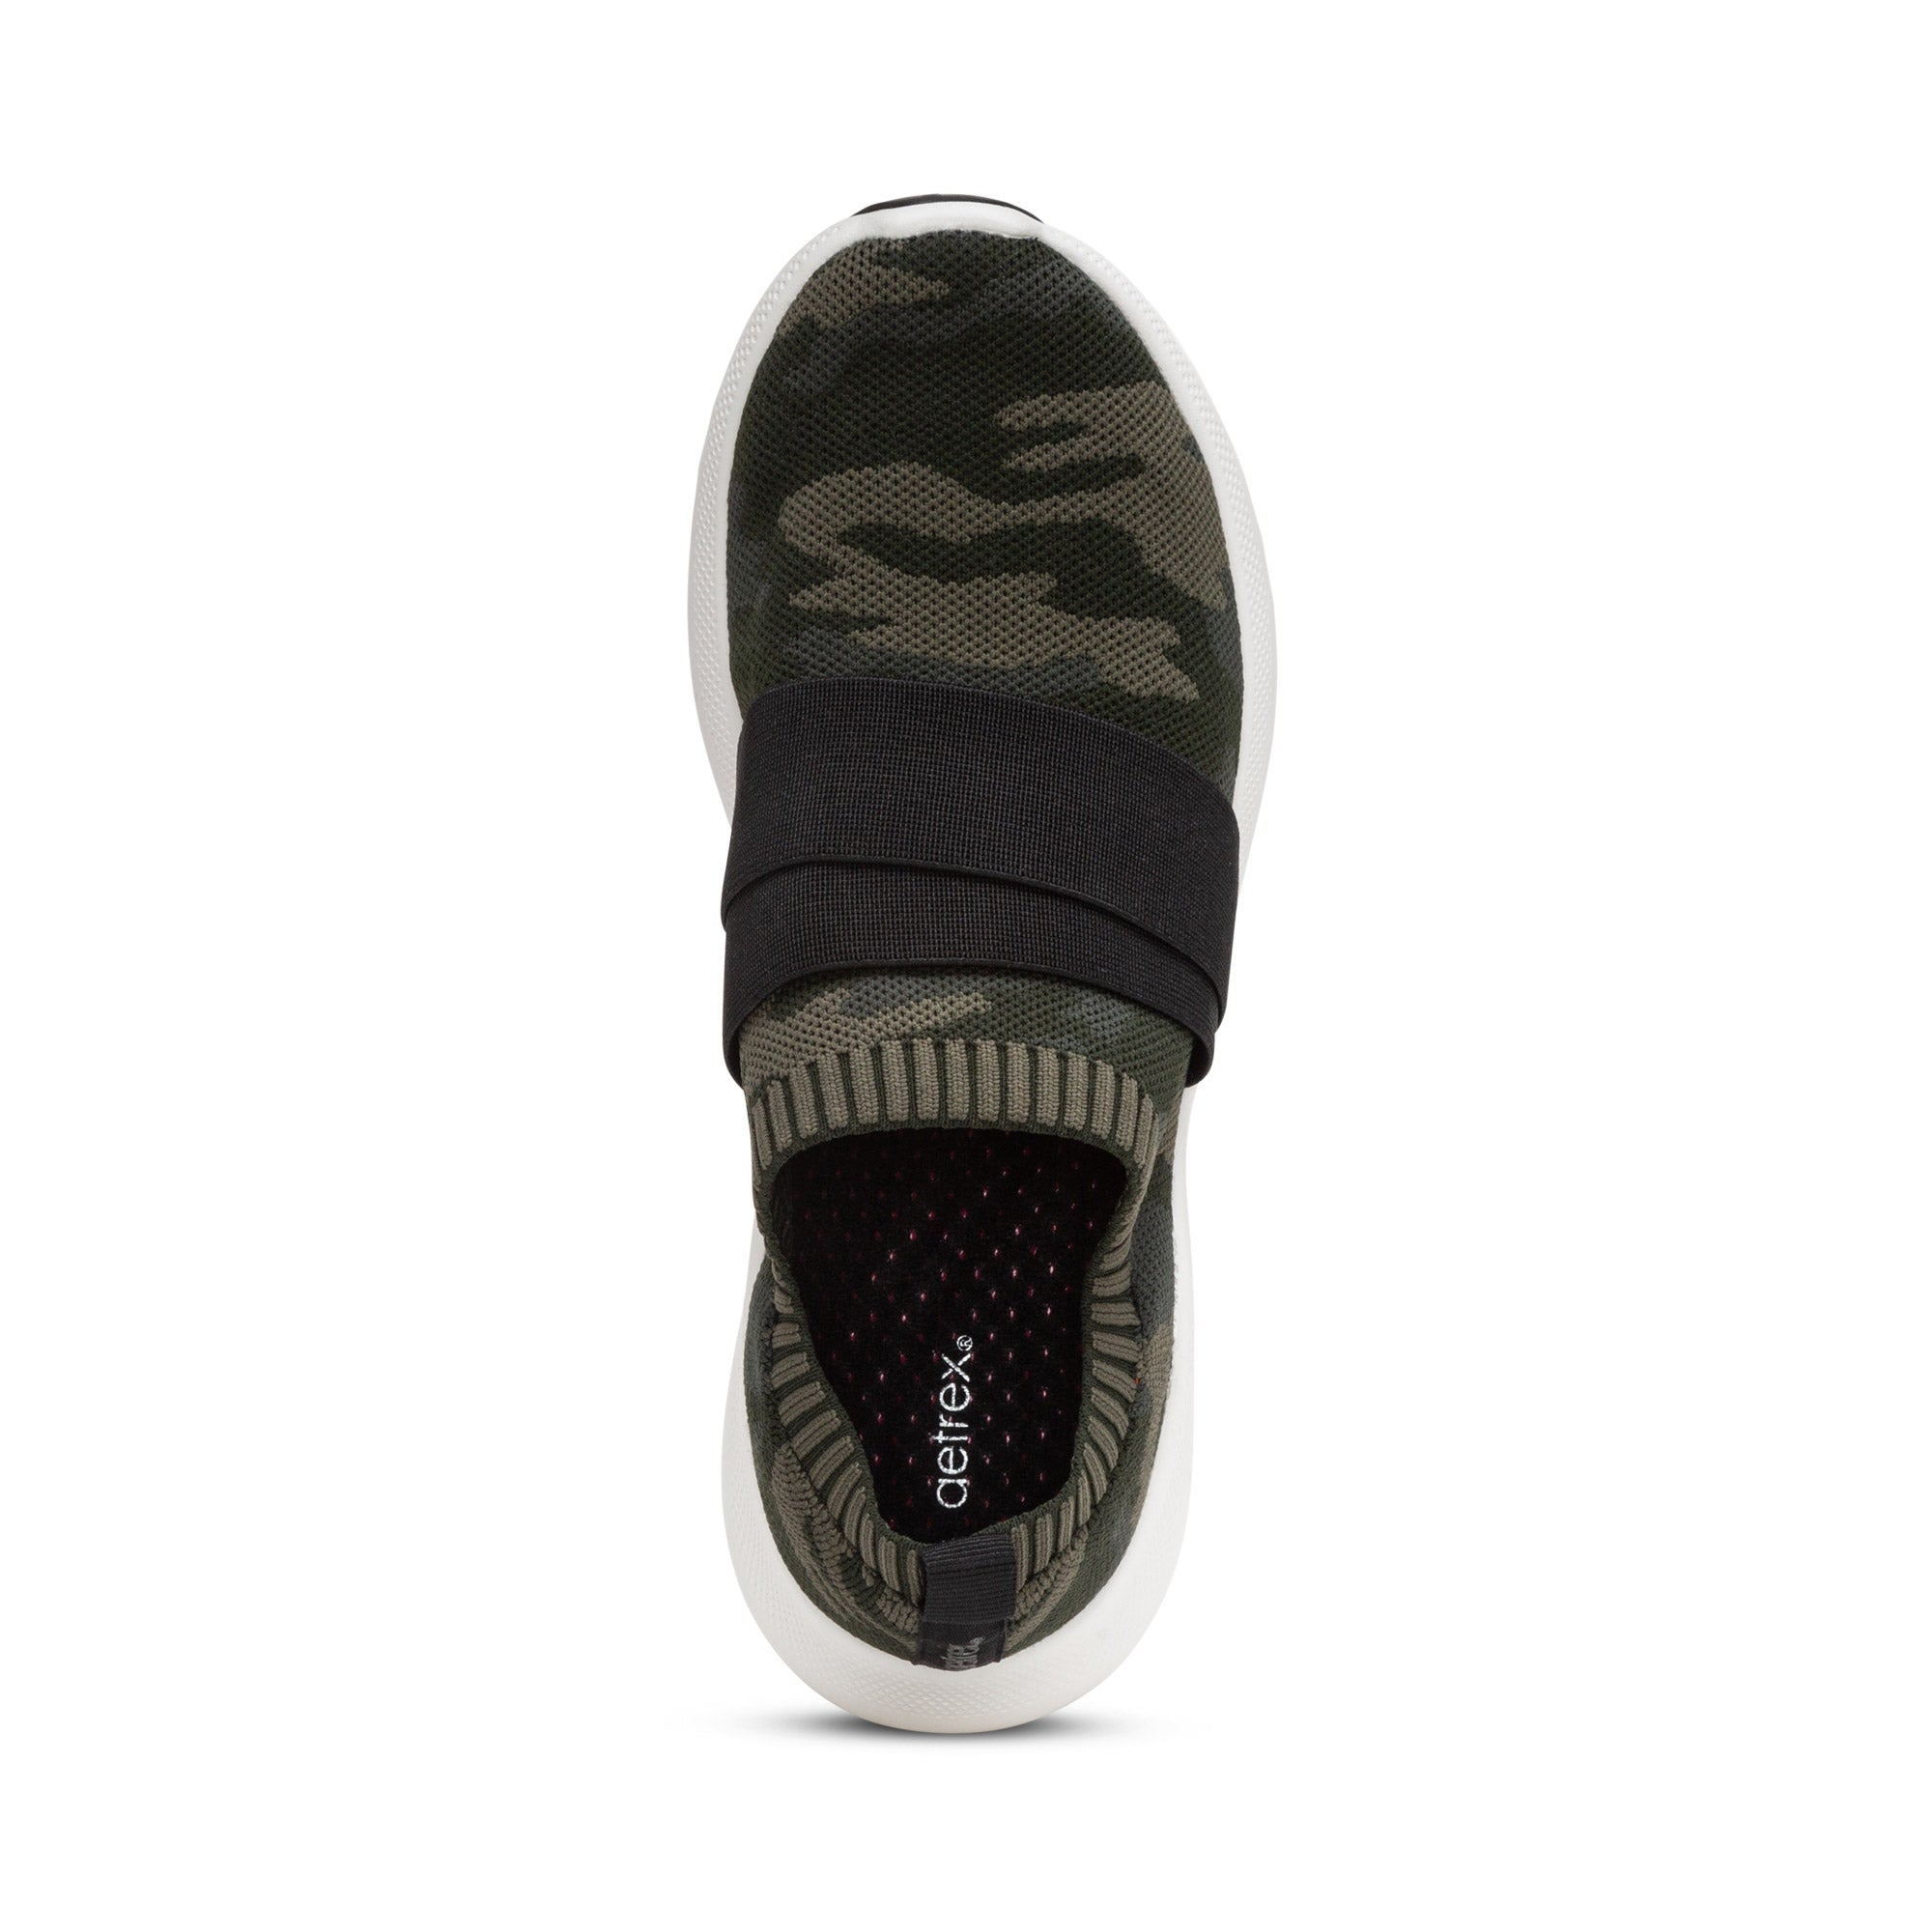 Aetrex Allie Arch Support Sneakers Women's  Color: Camouflage